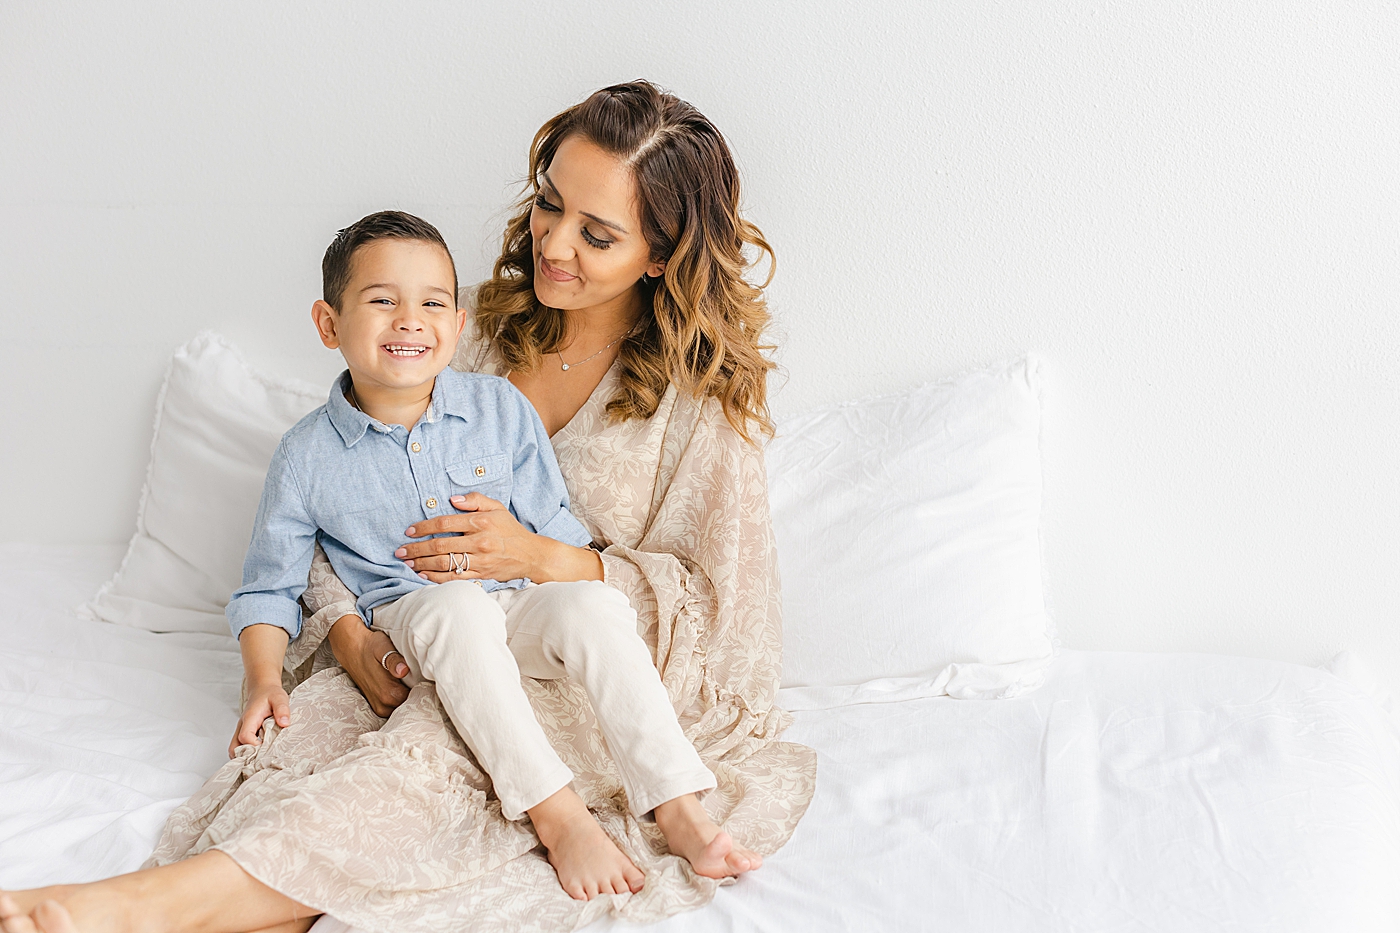 Mom sitting with her little boy on a white bed | Photo by Sana Ahmed Photography